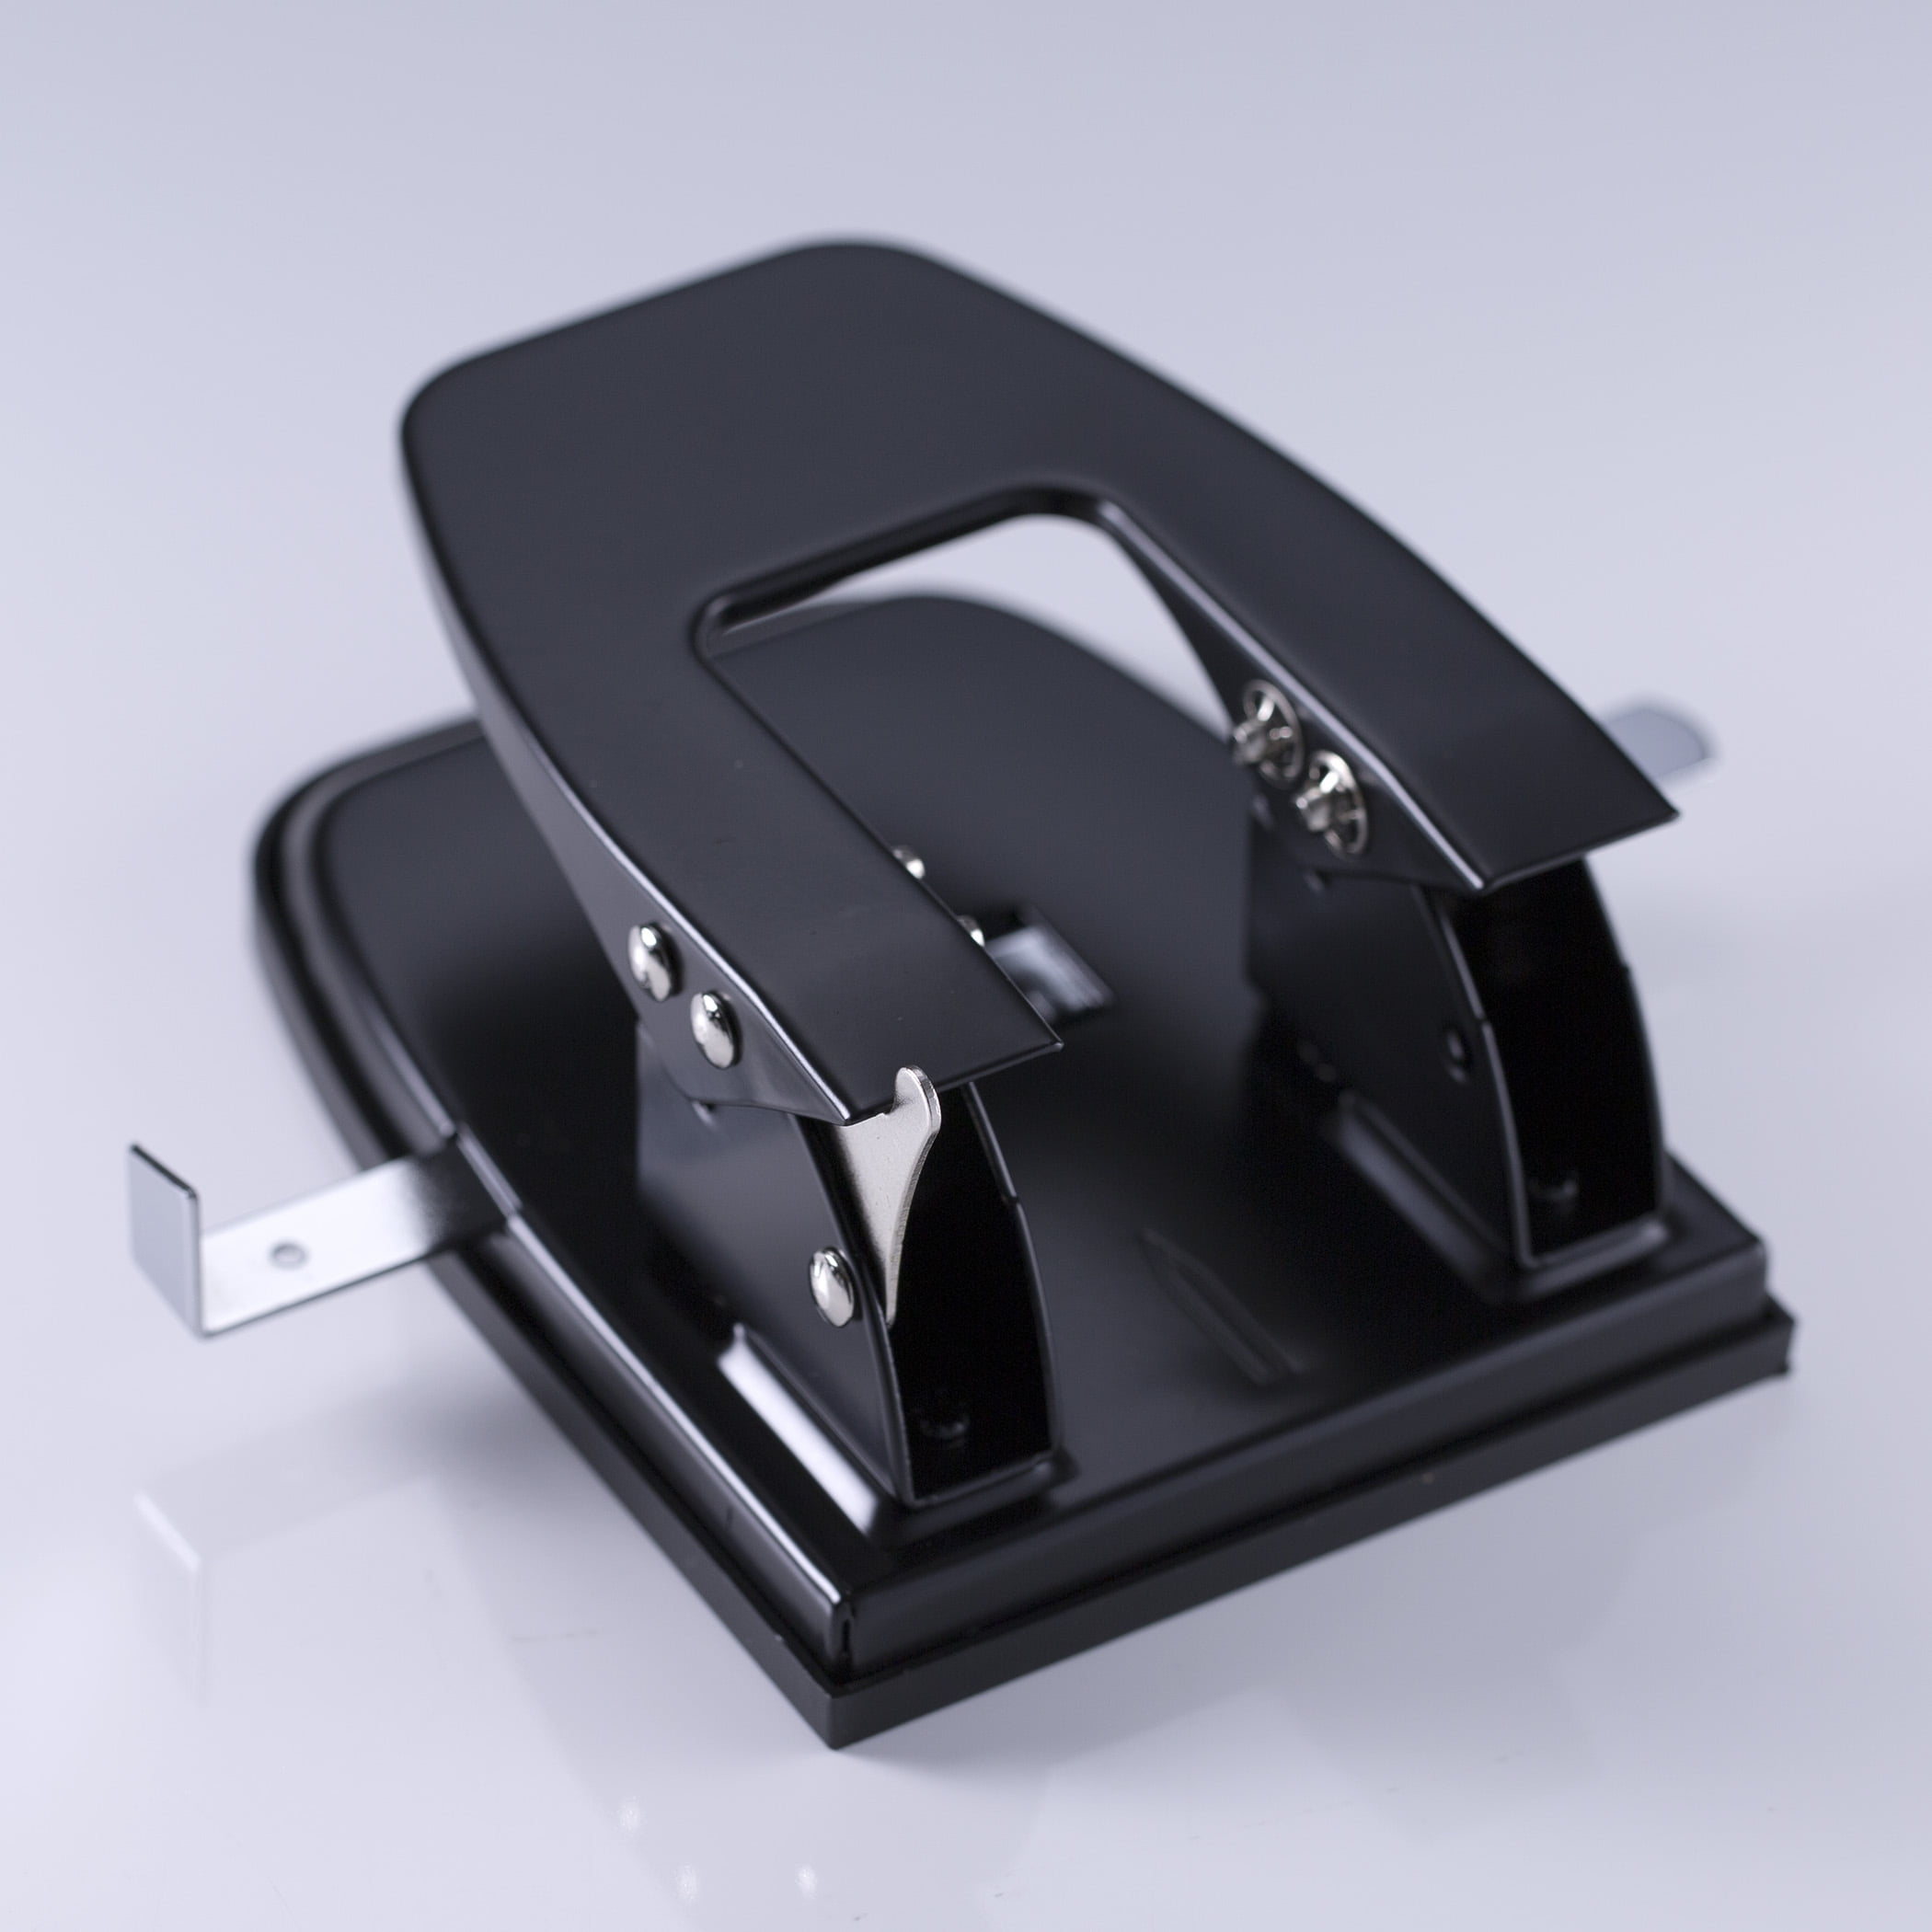 Puncher 3 hole Puncher - Biggest Online Office Supplies Store